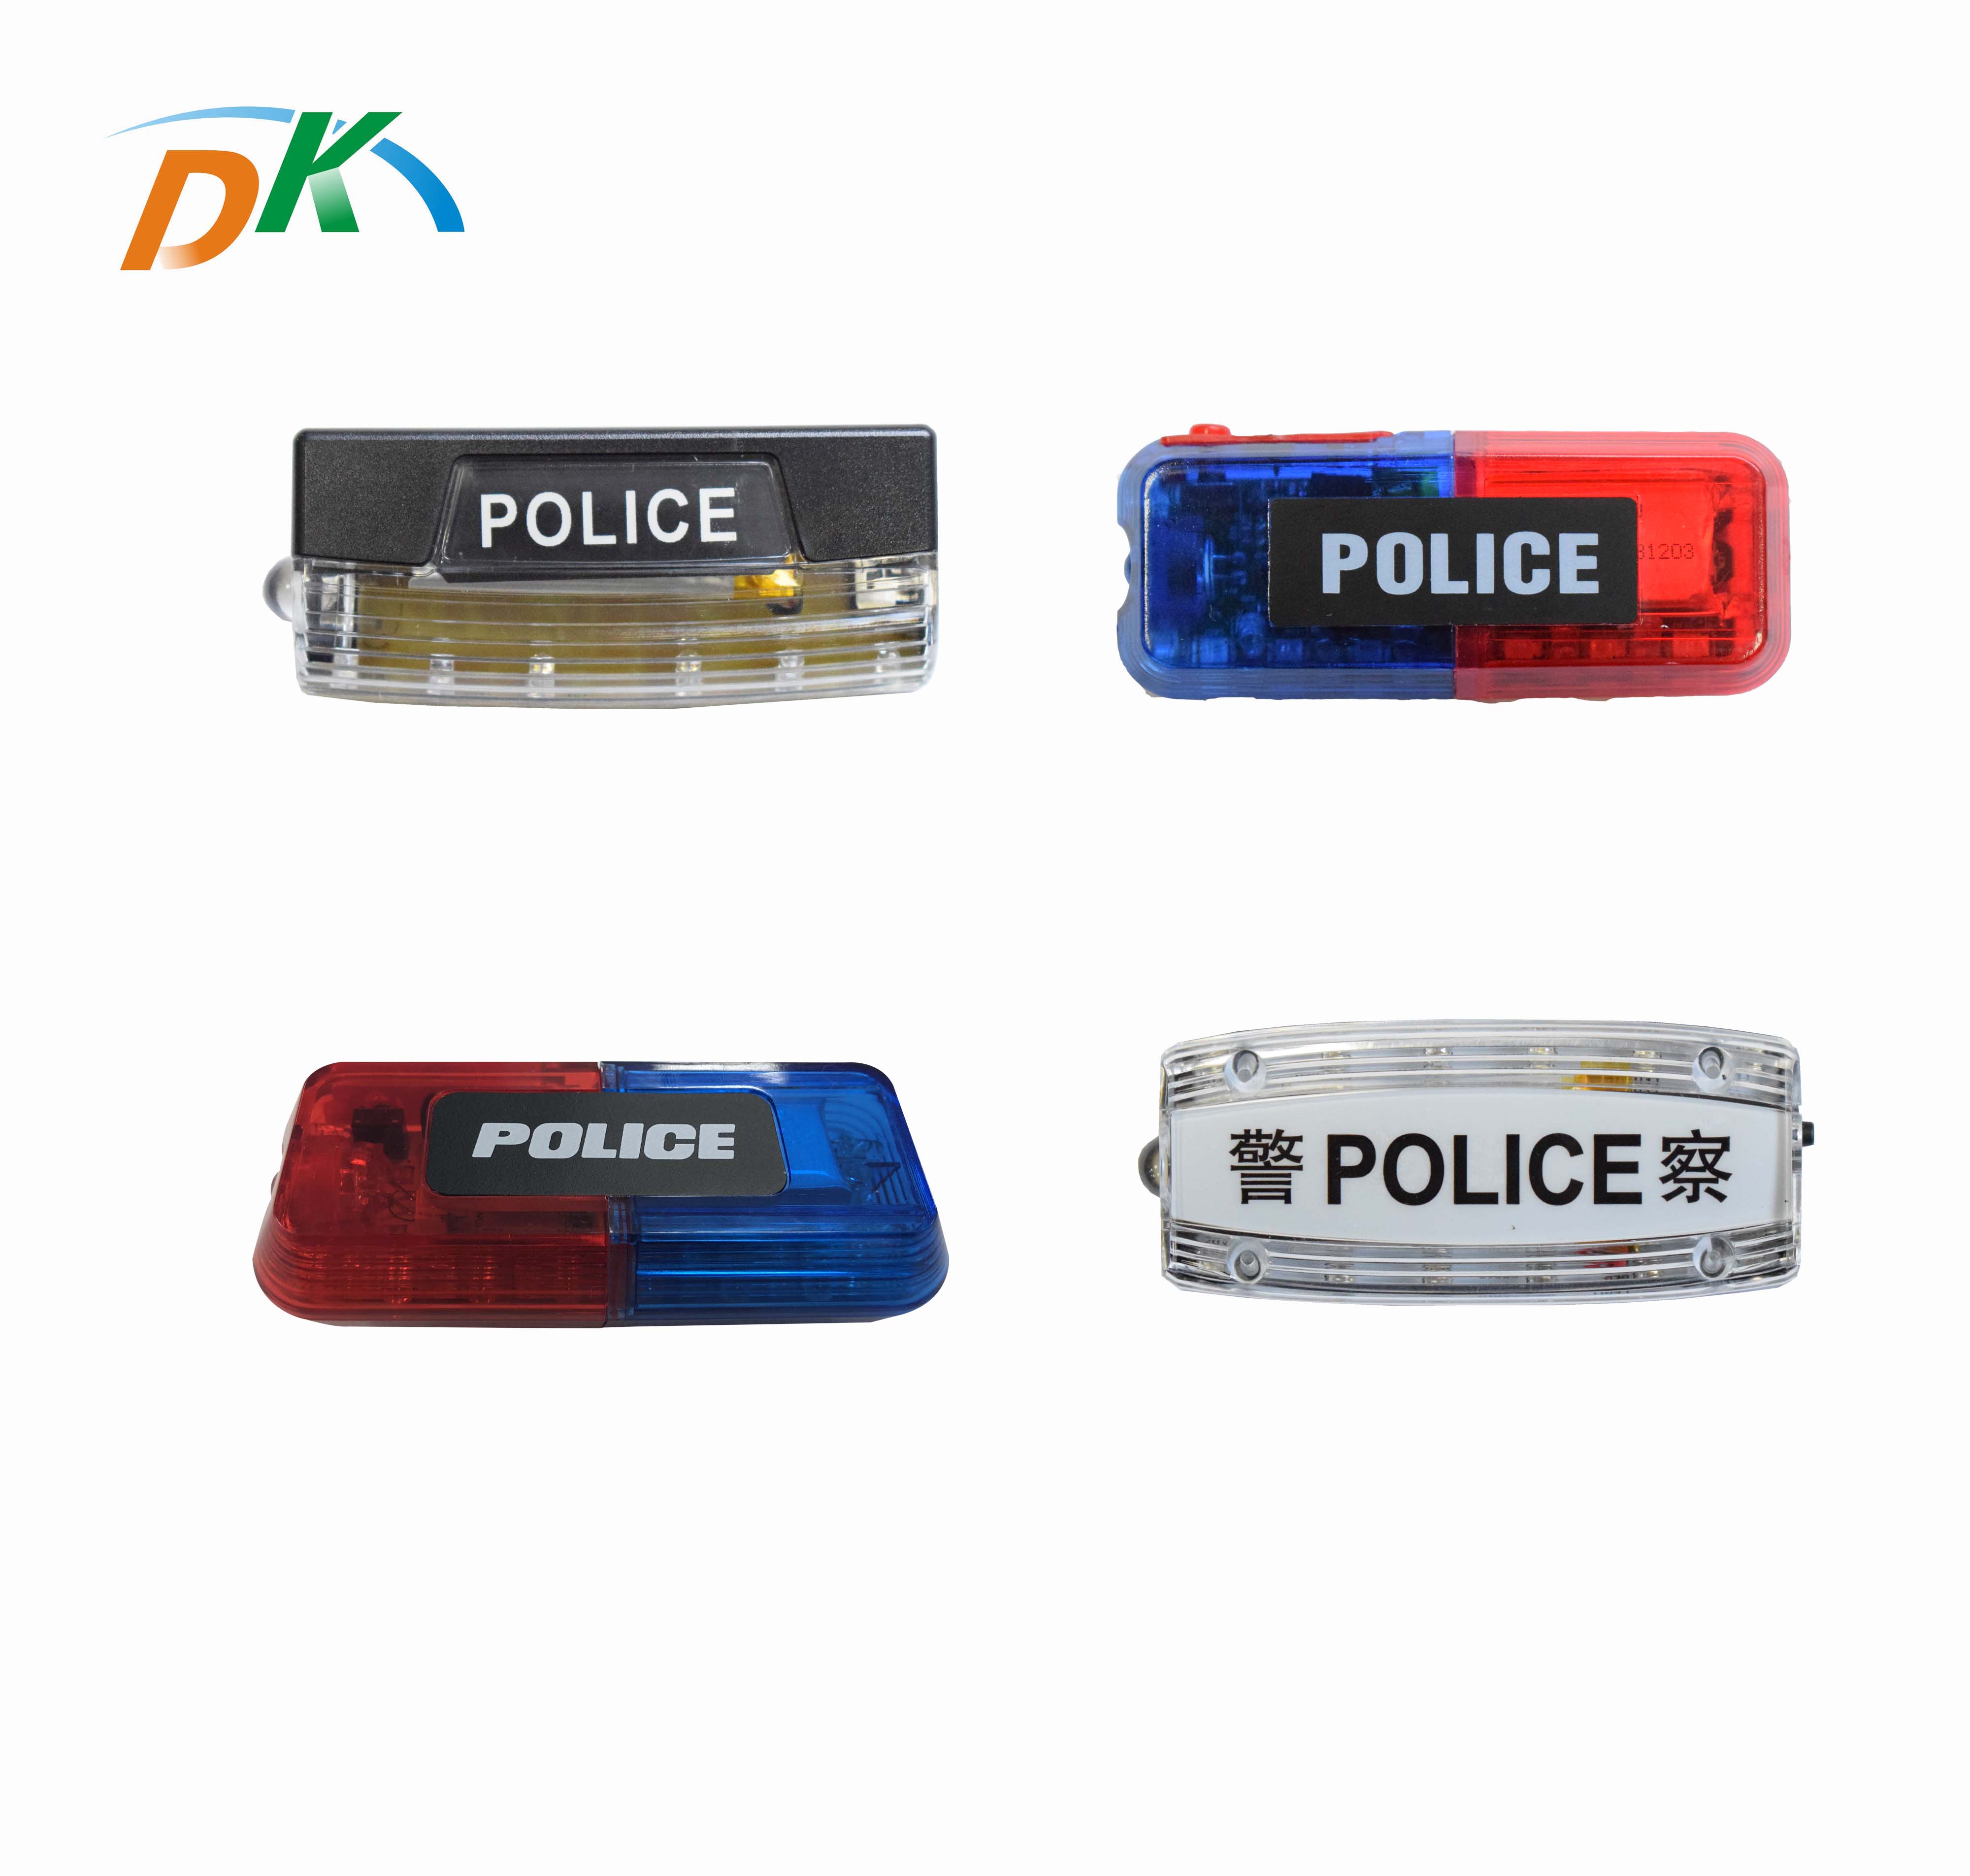 DK LED Flashing police shoulder warning light with rechargeable lithium battery